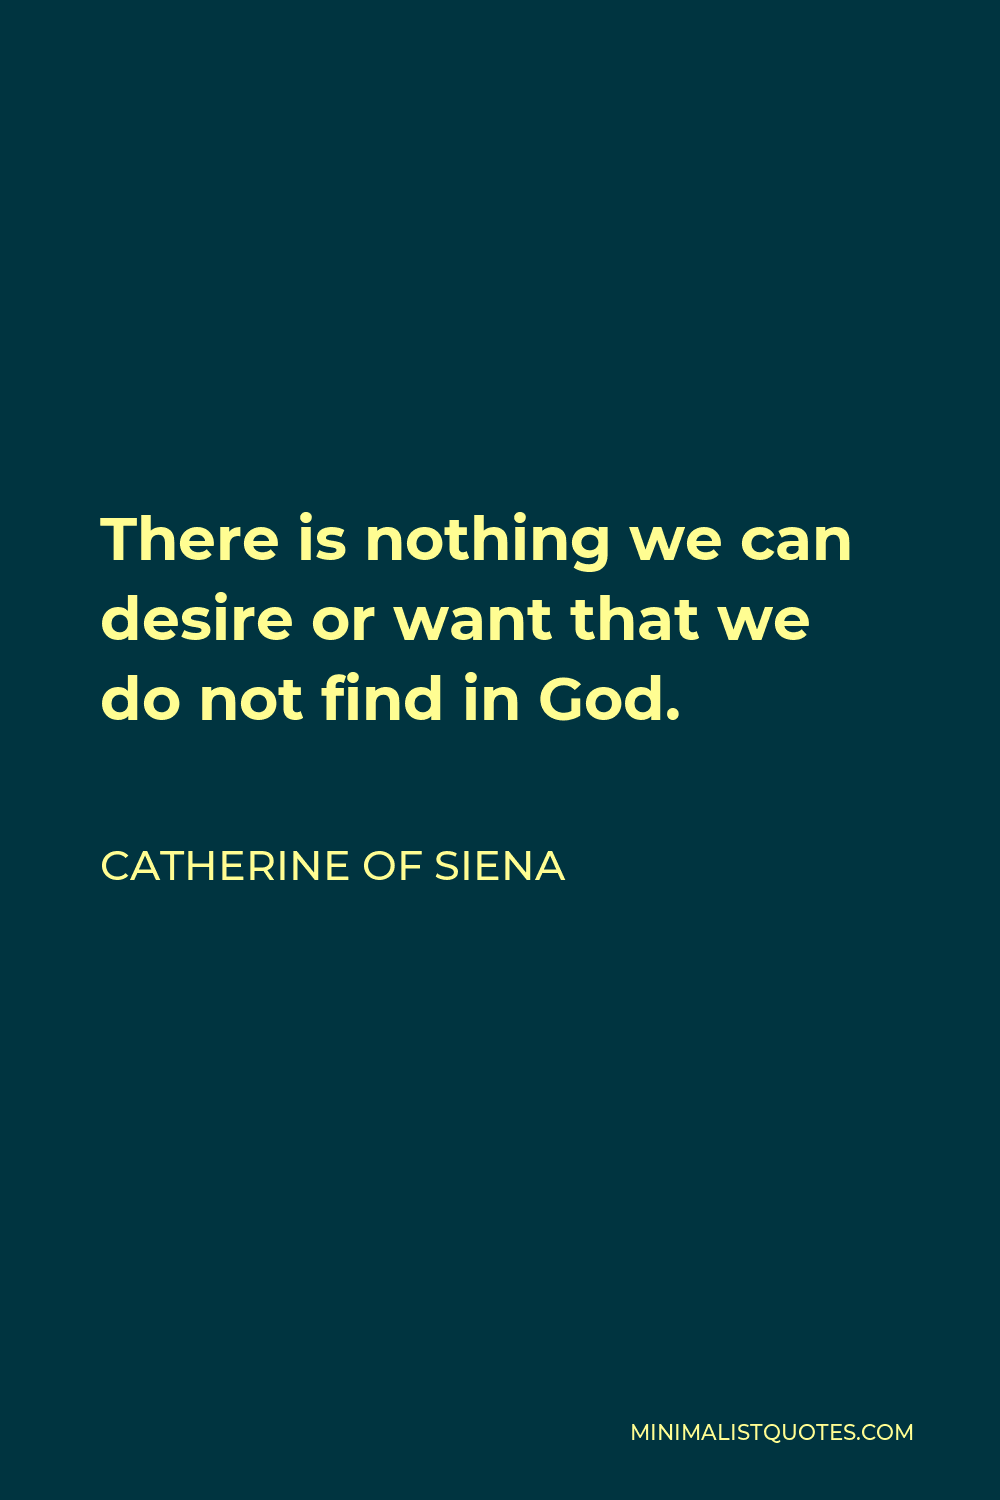 Catherine of Siena Quote - There is nothing we can desire or want that we do not find in God.